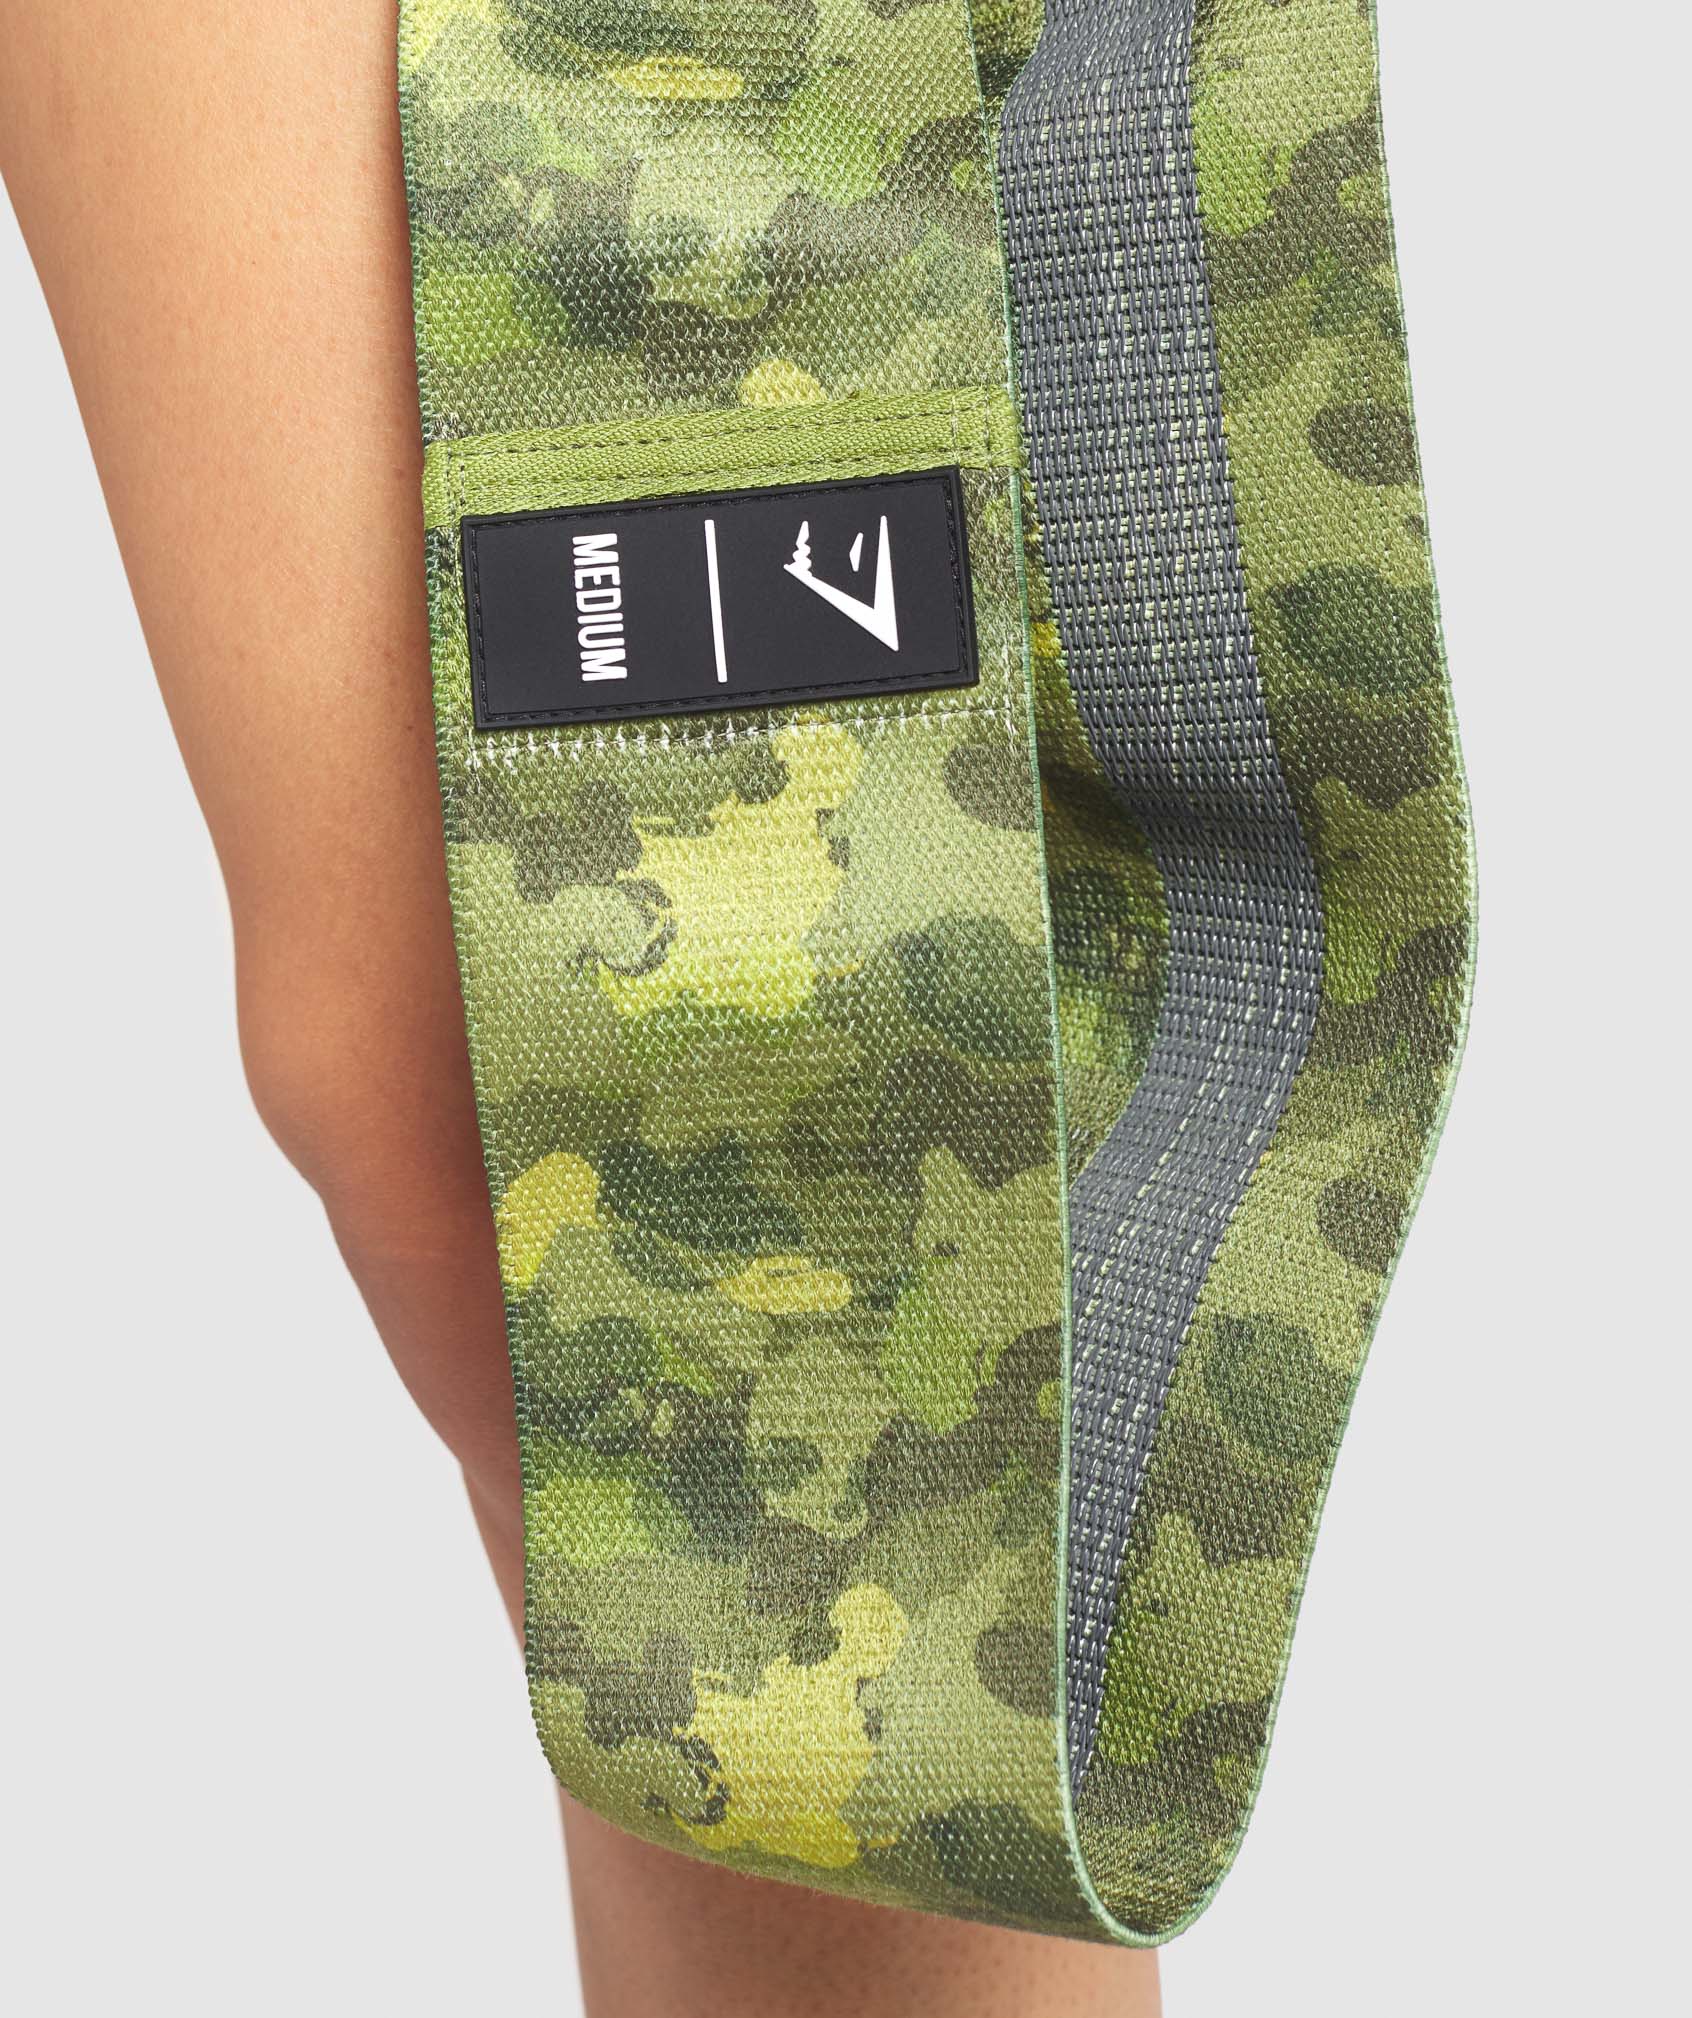 Medium Resistance Band in Camo - view 3